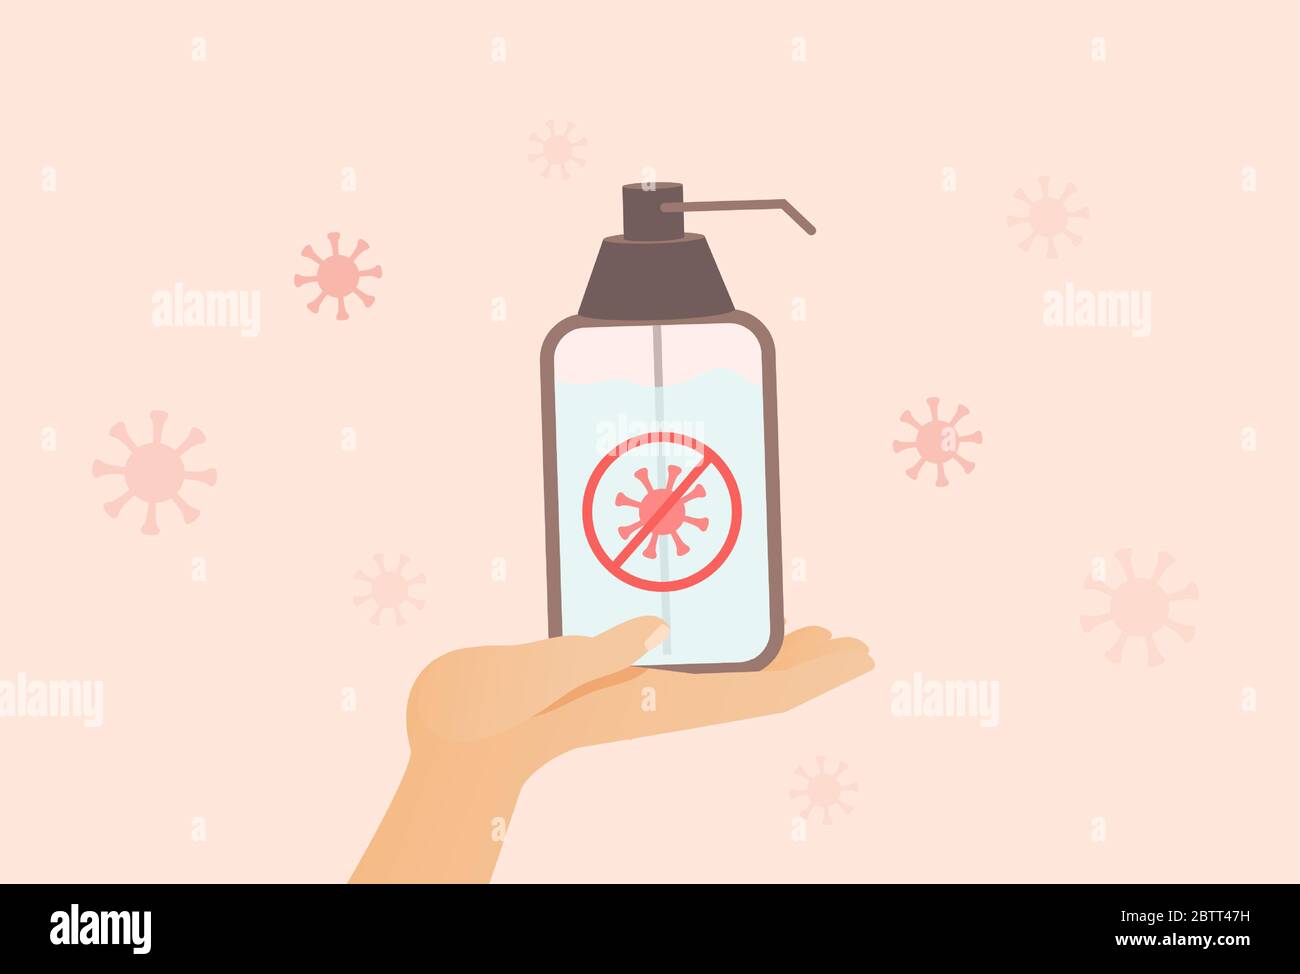 Pump spray bottle with medical antiseptic vector flat illustration. Disinfection alcohol liquid on the hand. Protection against Coronavirus, defend yourself, and fight the viruses concept. Stock Vector